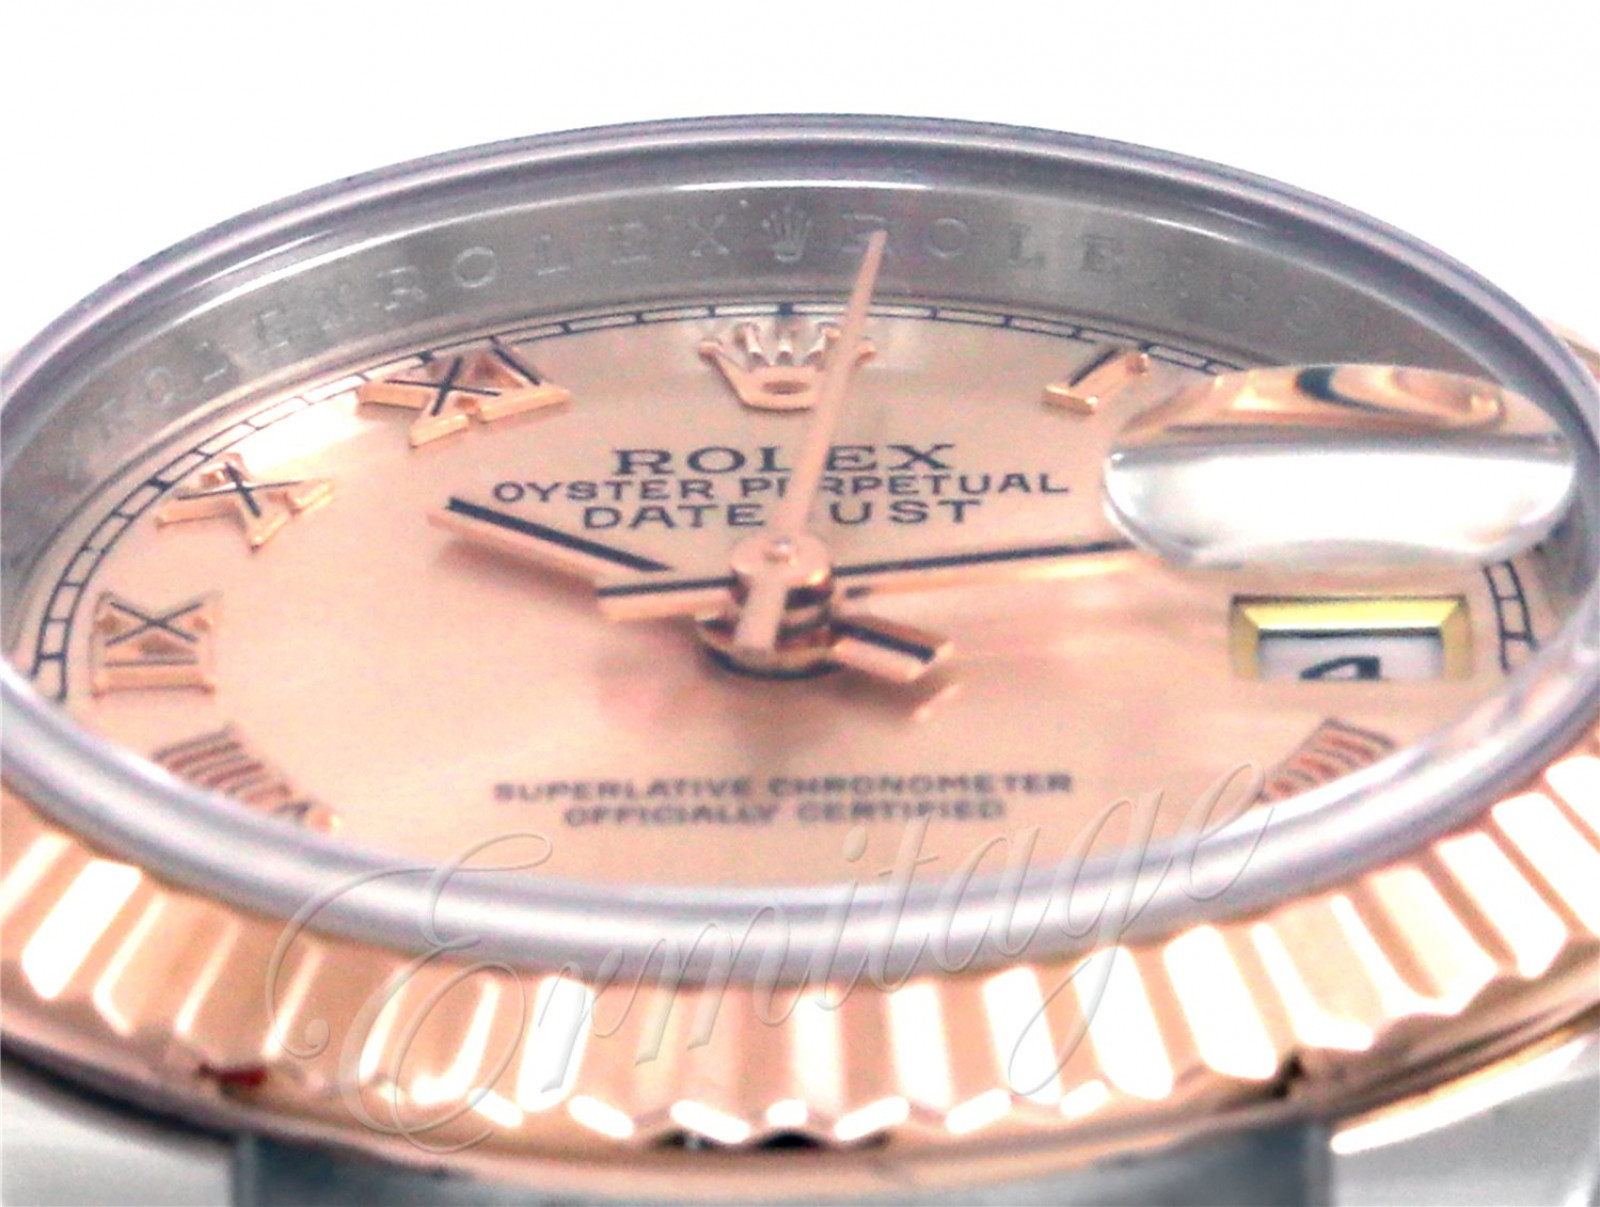 Pre-Owned Rolex Datejust 179171 Rose Gold